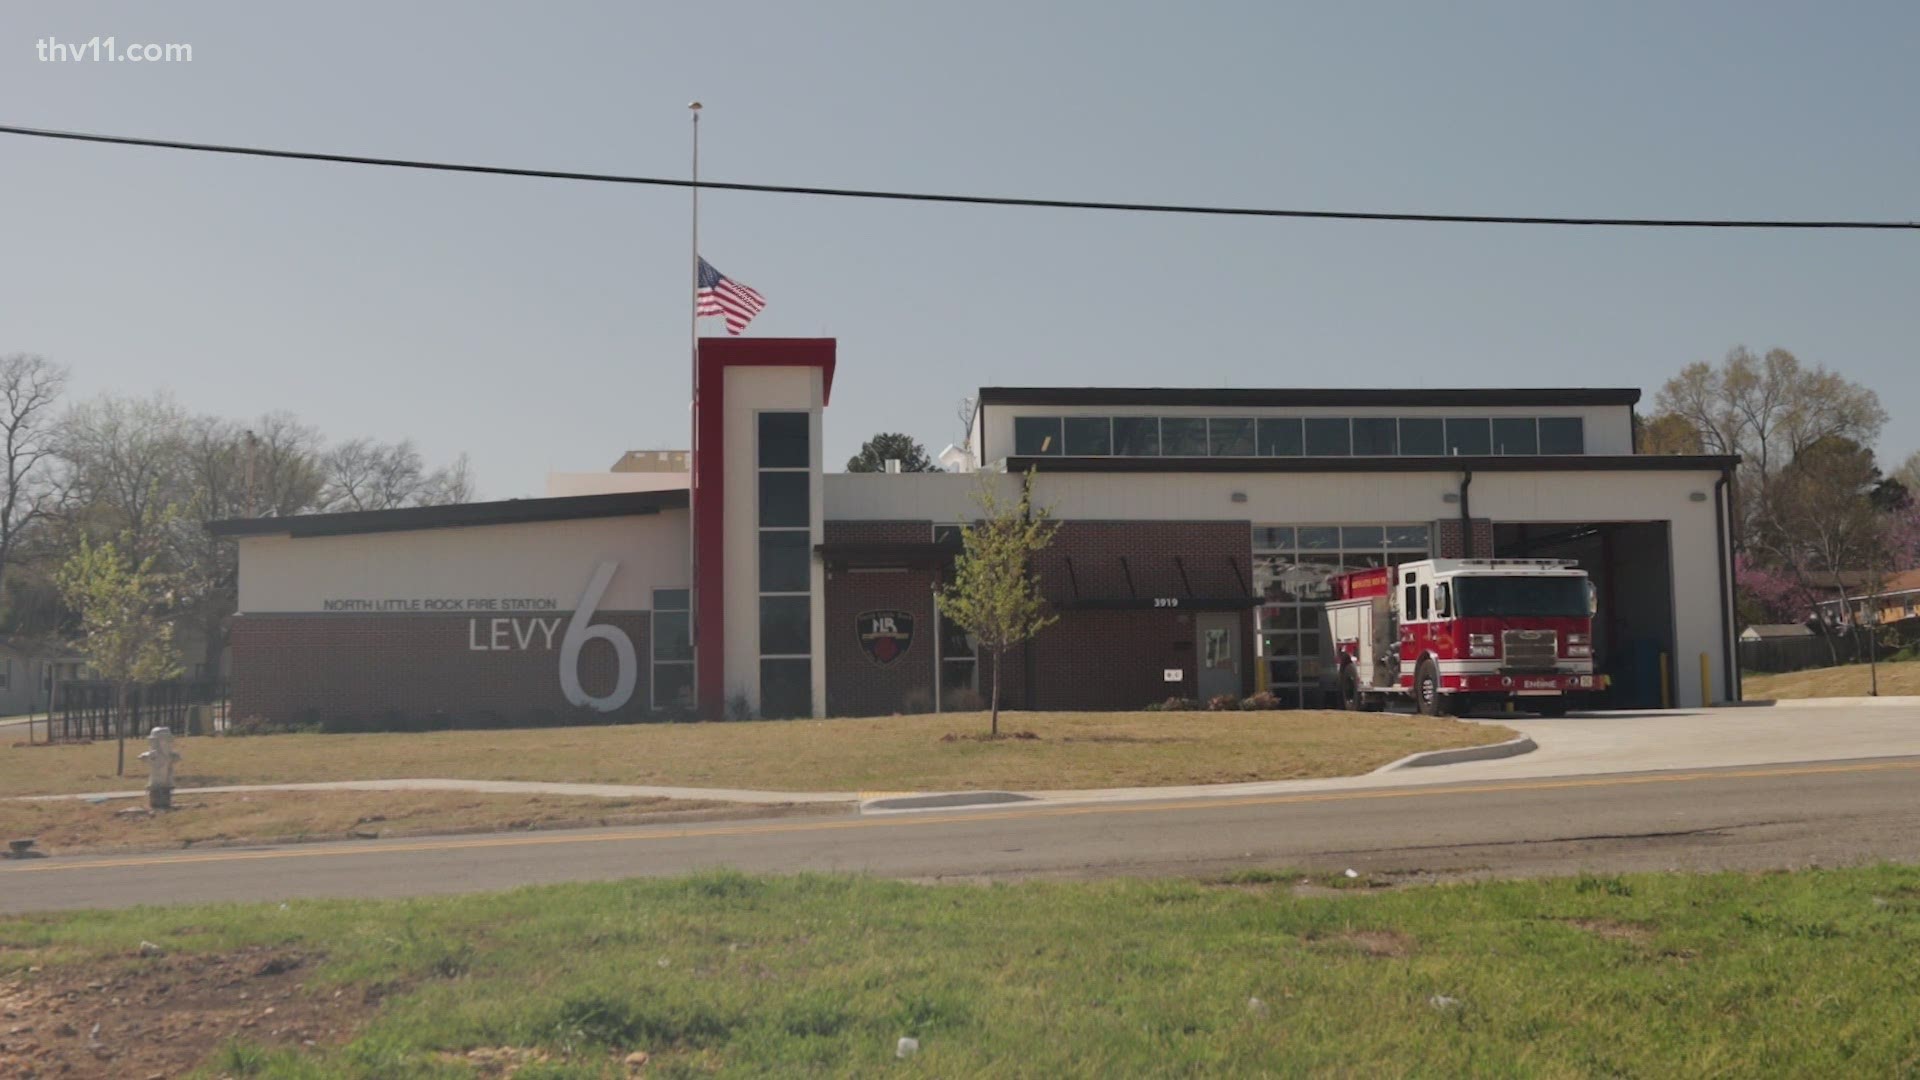 North Little Rock opened its first new fire station in 20 years.